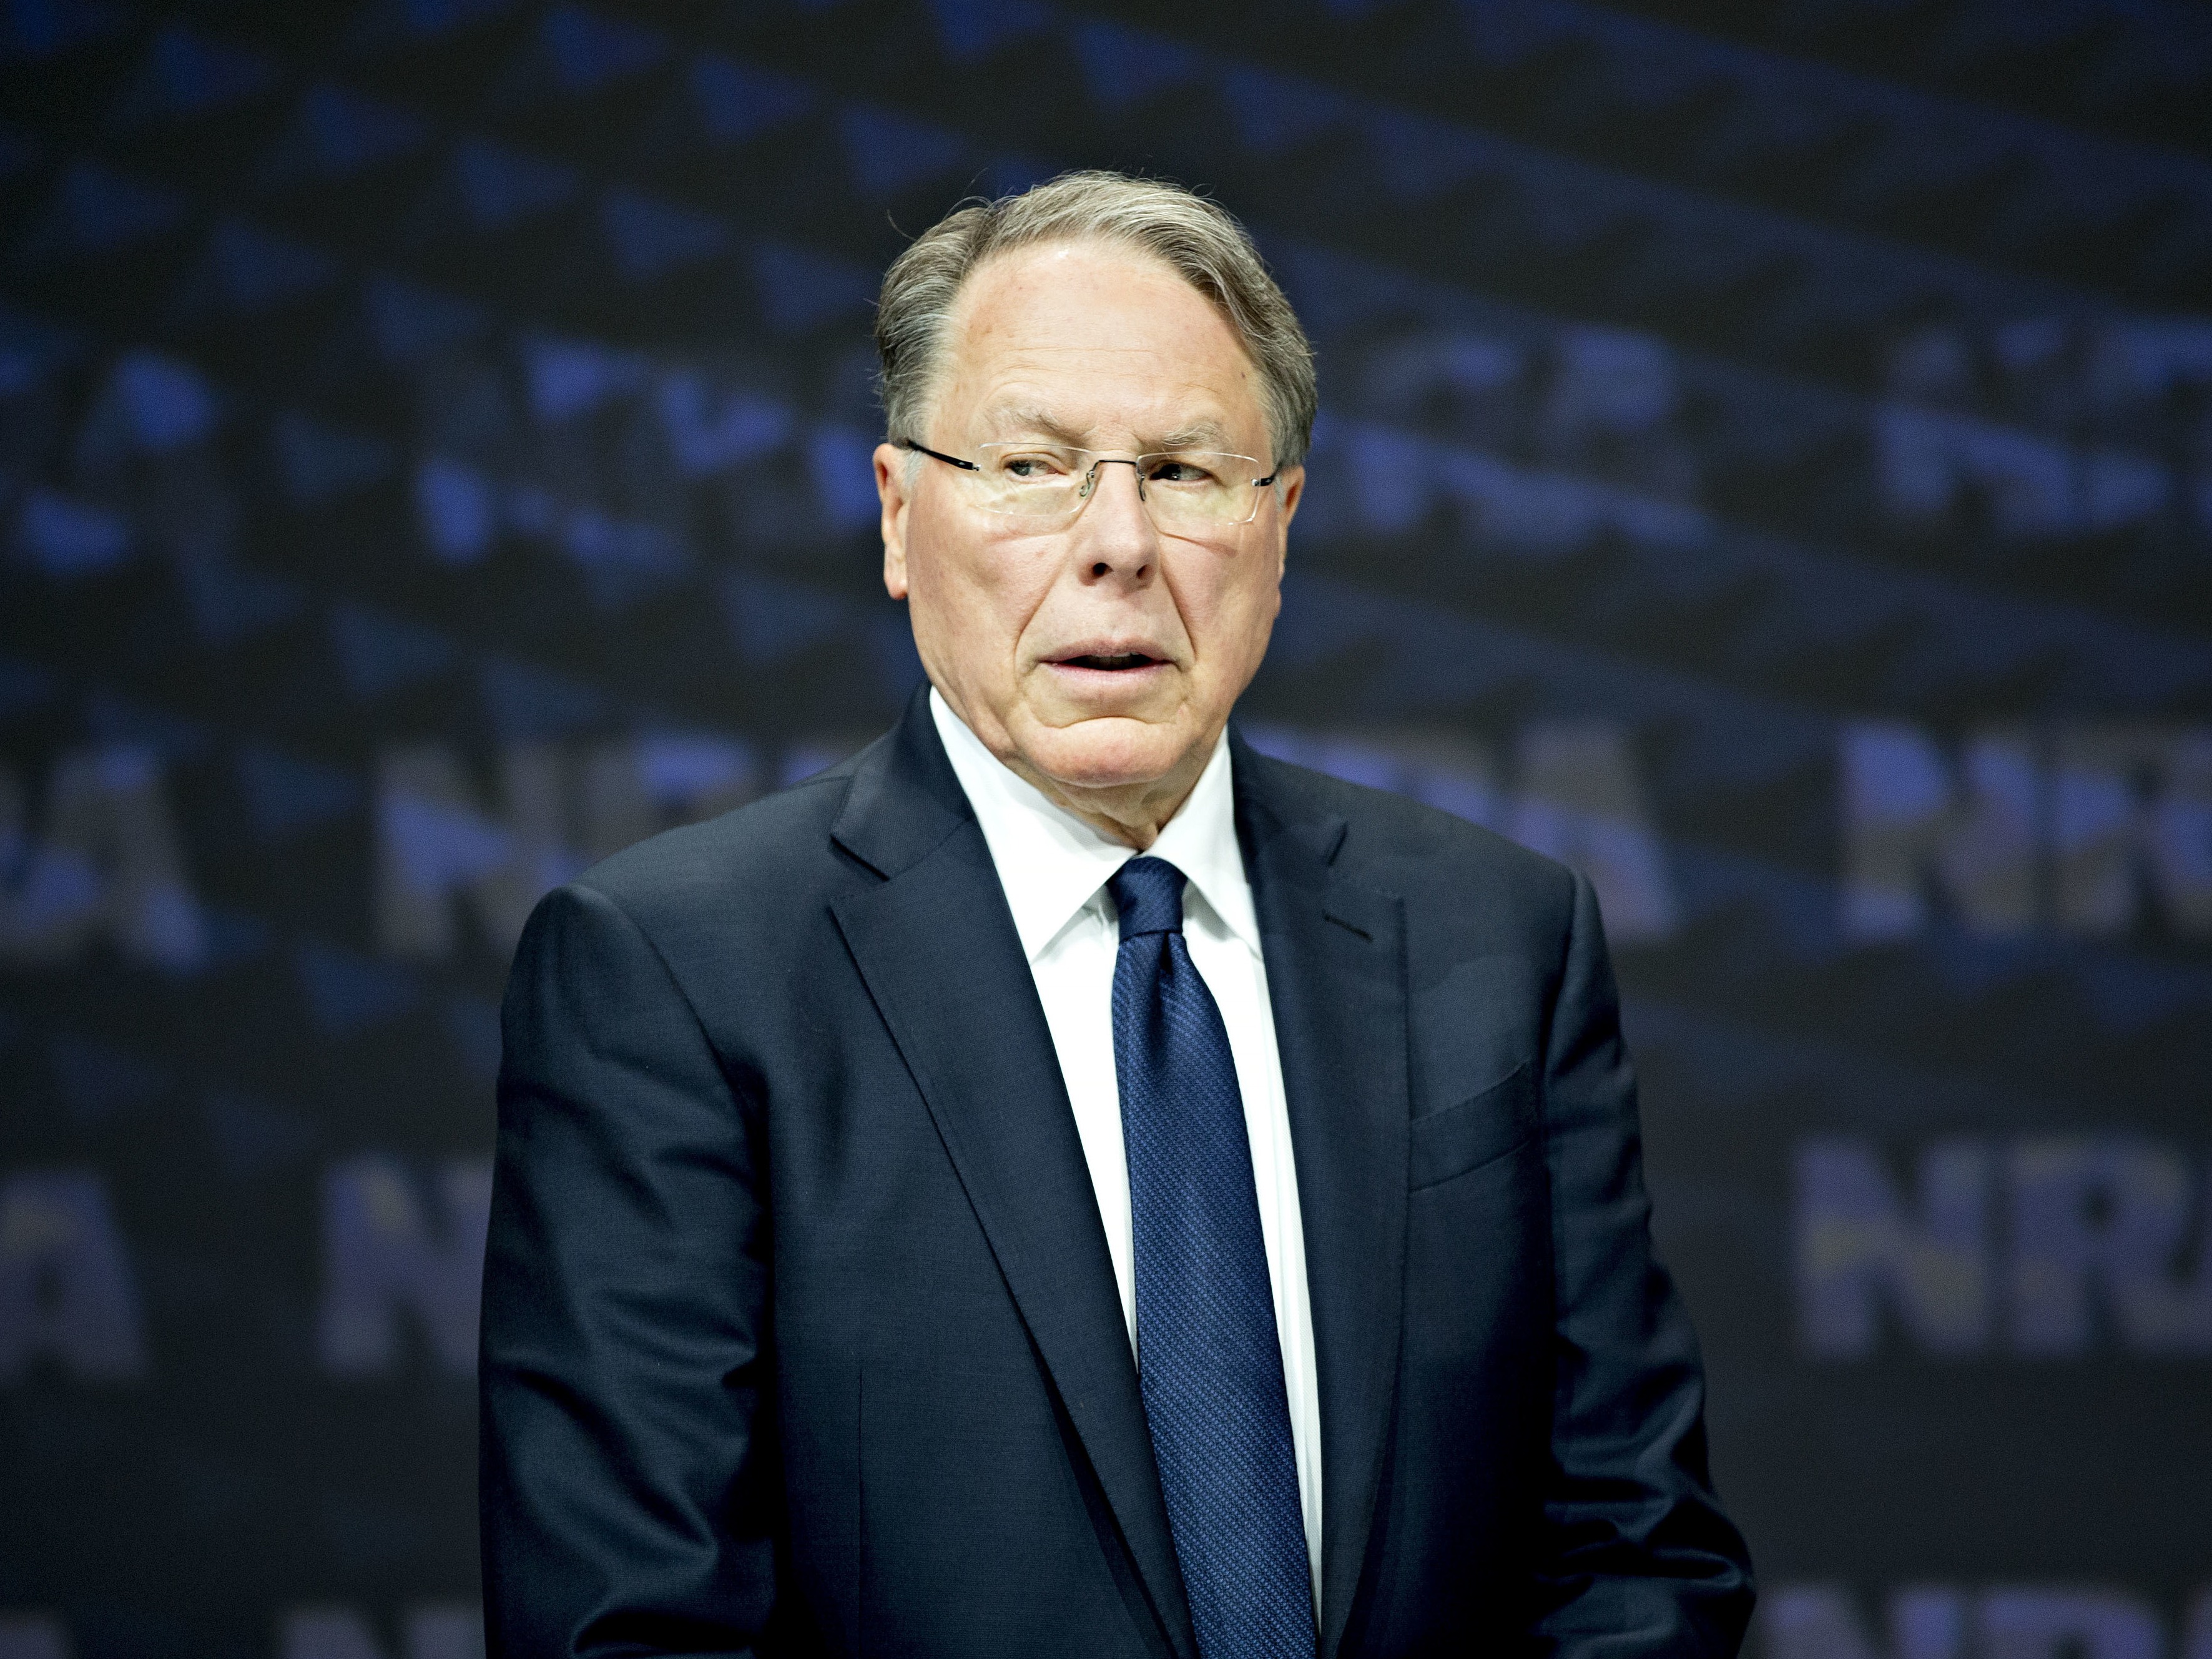 National Rifle Association CEO Wayne LaPierre at the group's annual meeting in Dallas in May 2018. A secretive figure, LaPierre makes few public appearances outside of carefully scripted speeches. CREDIT: Daniel Acker/Bloomberg via Getty Images